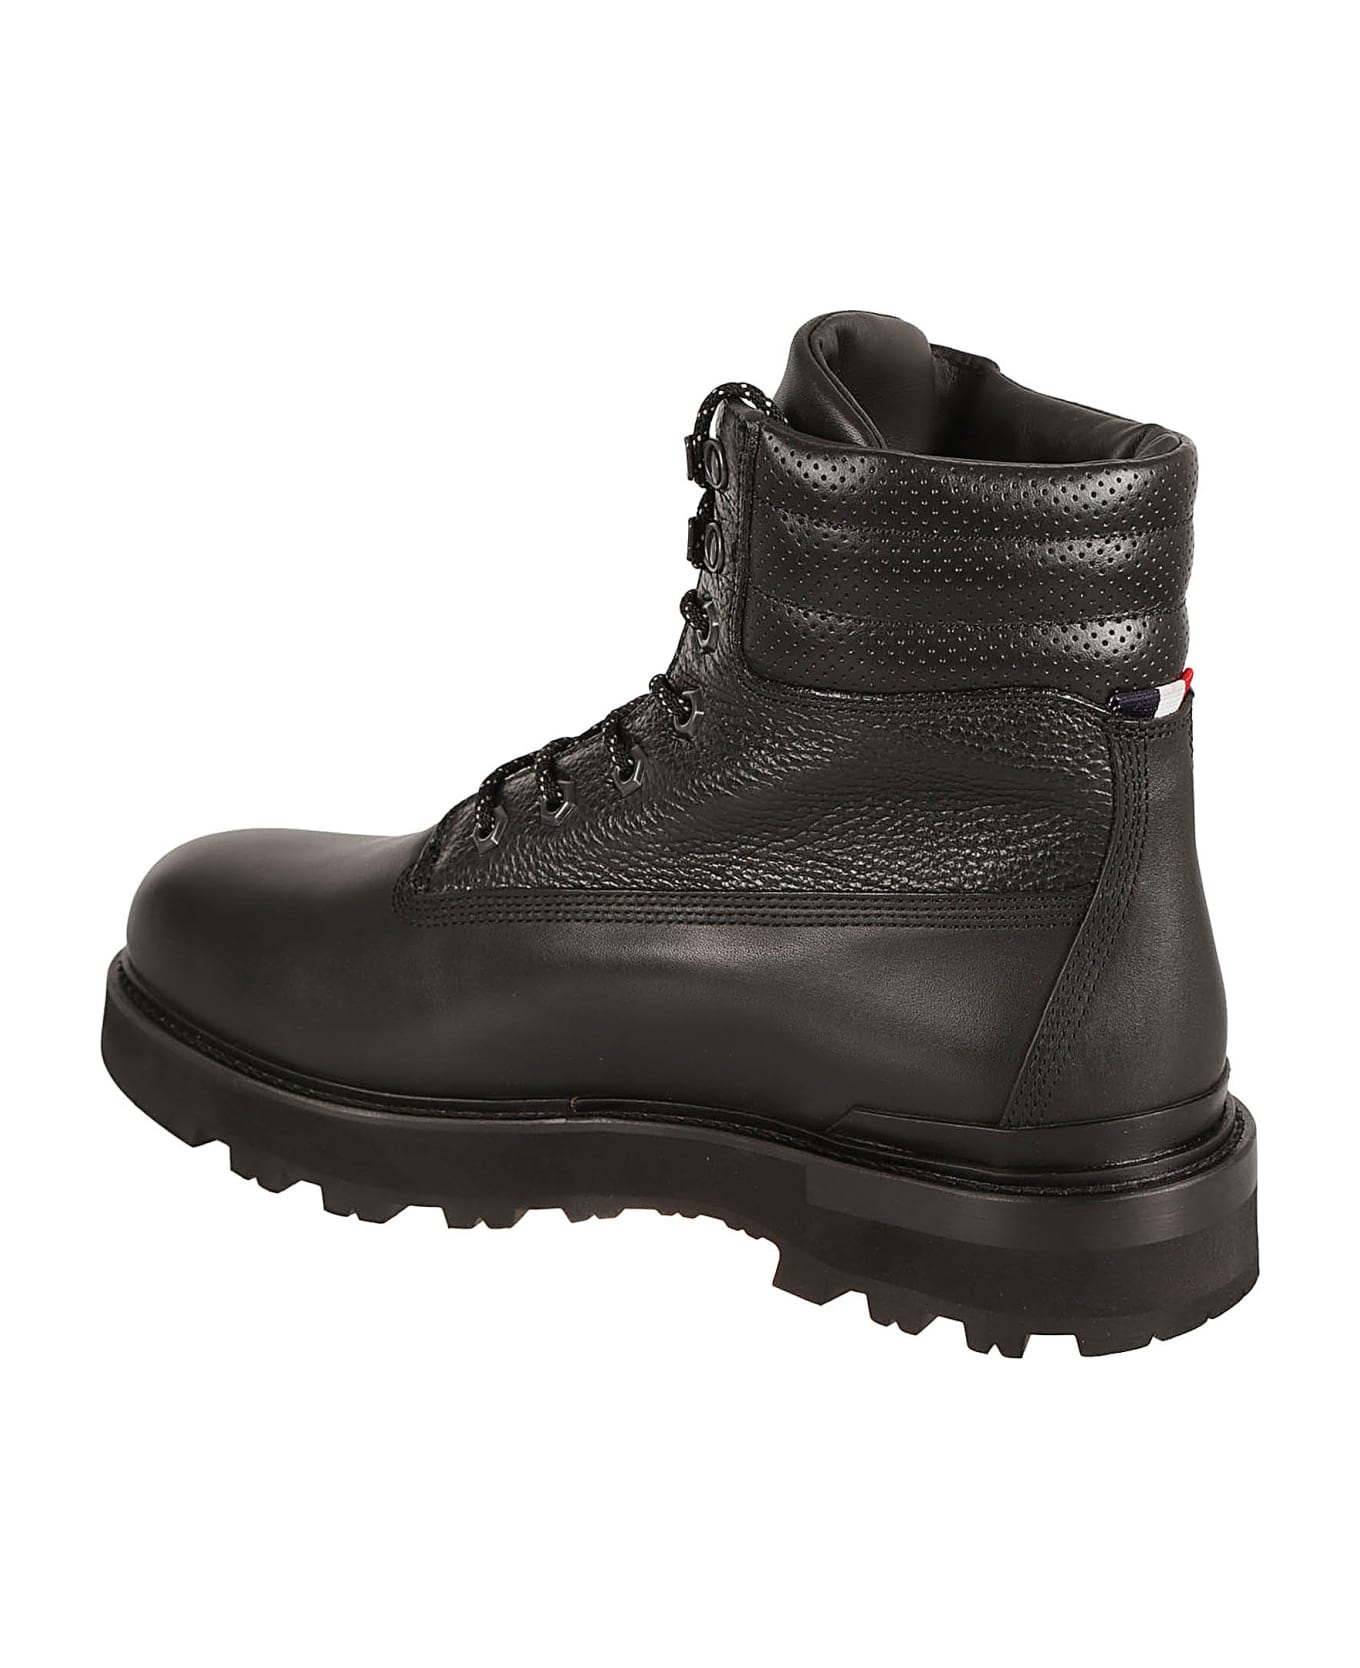 Moncler Peka Lace-up Boots - Black ブーツ